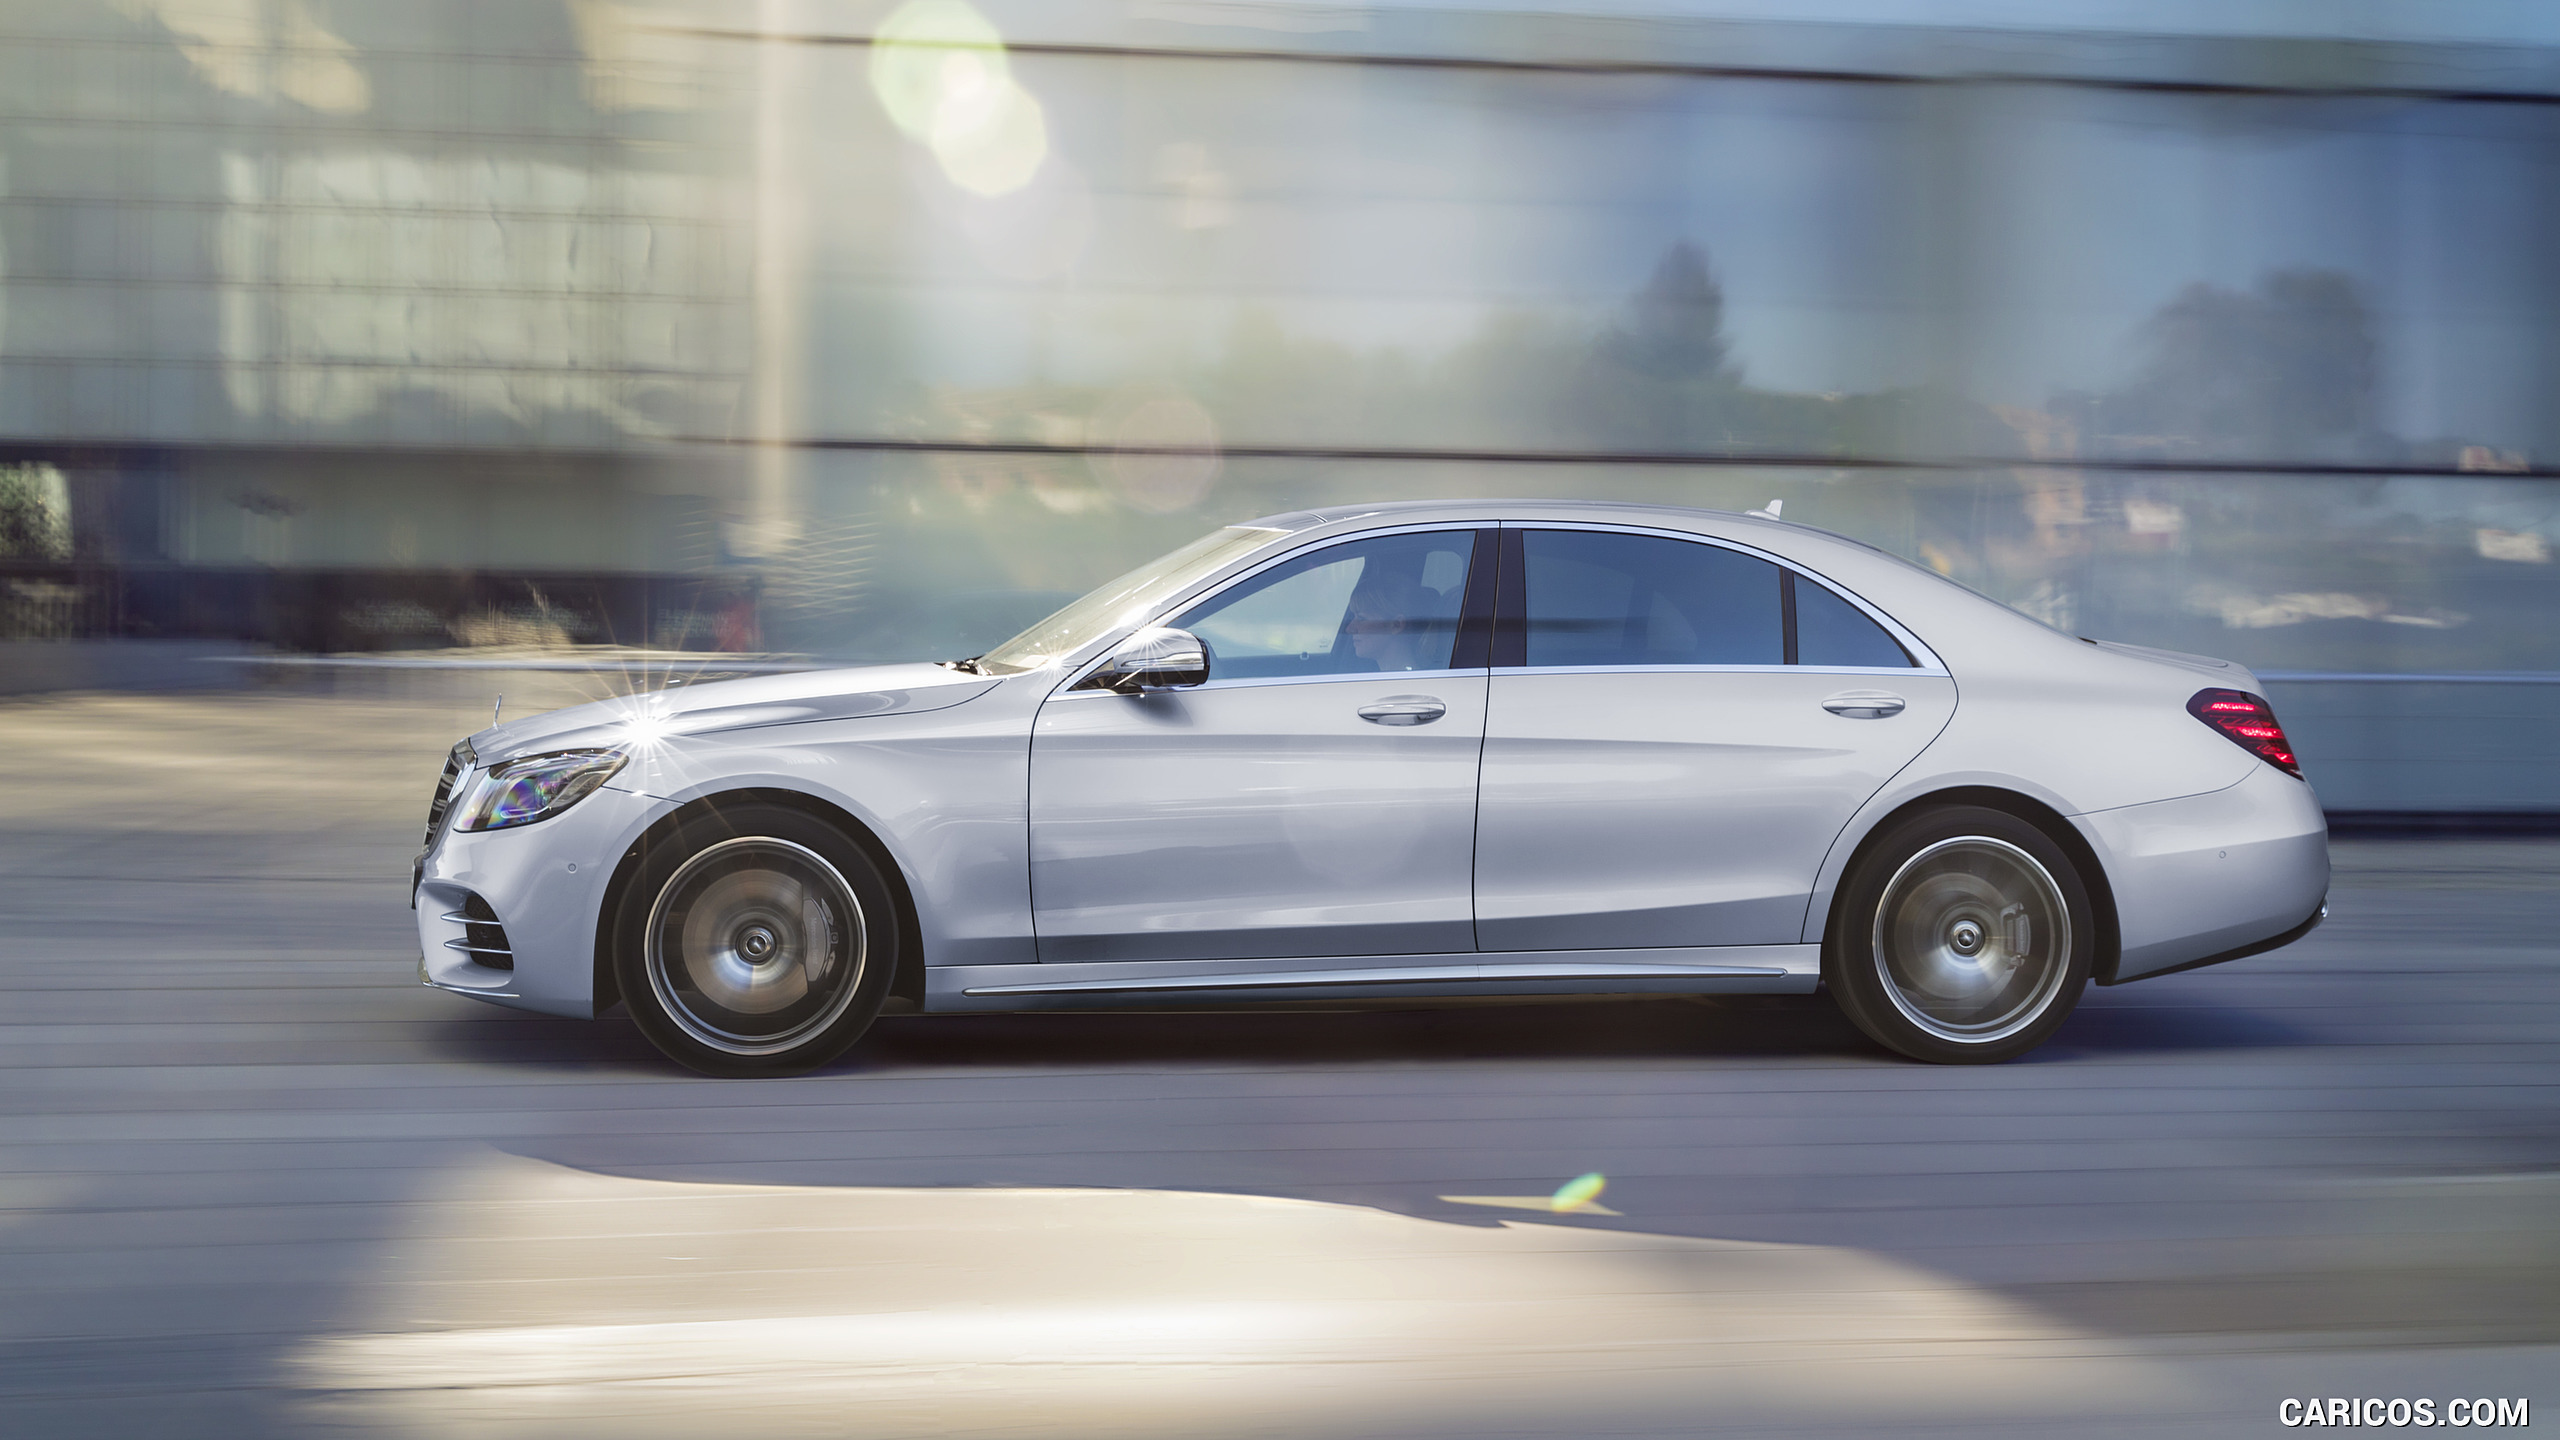 2018 Mercedes-Benz S-Class AMG Line LWB (Color: Diamond Silver), #3 of 156